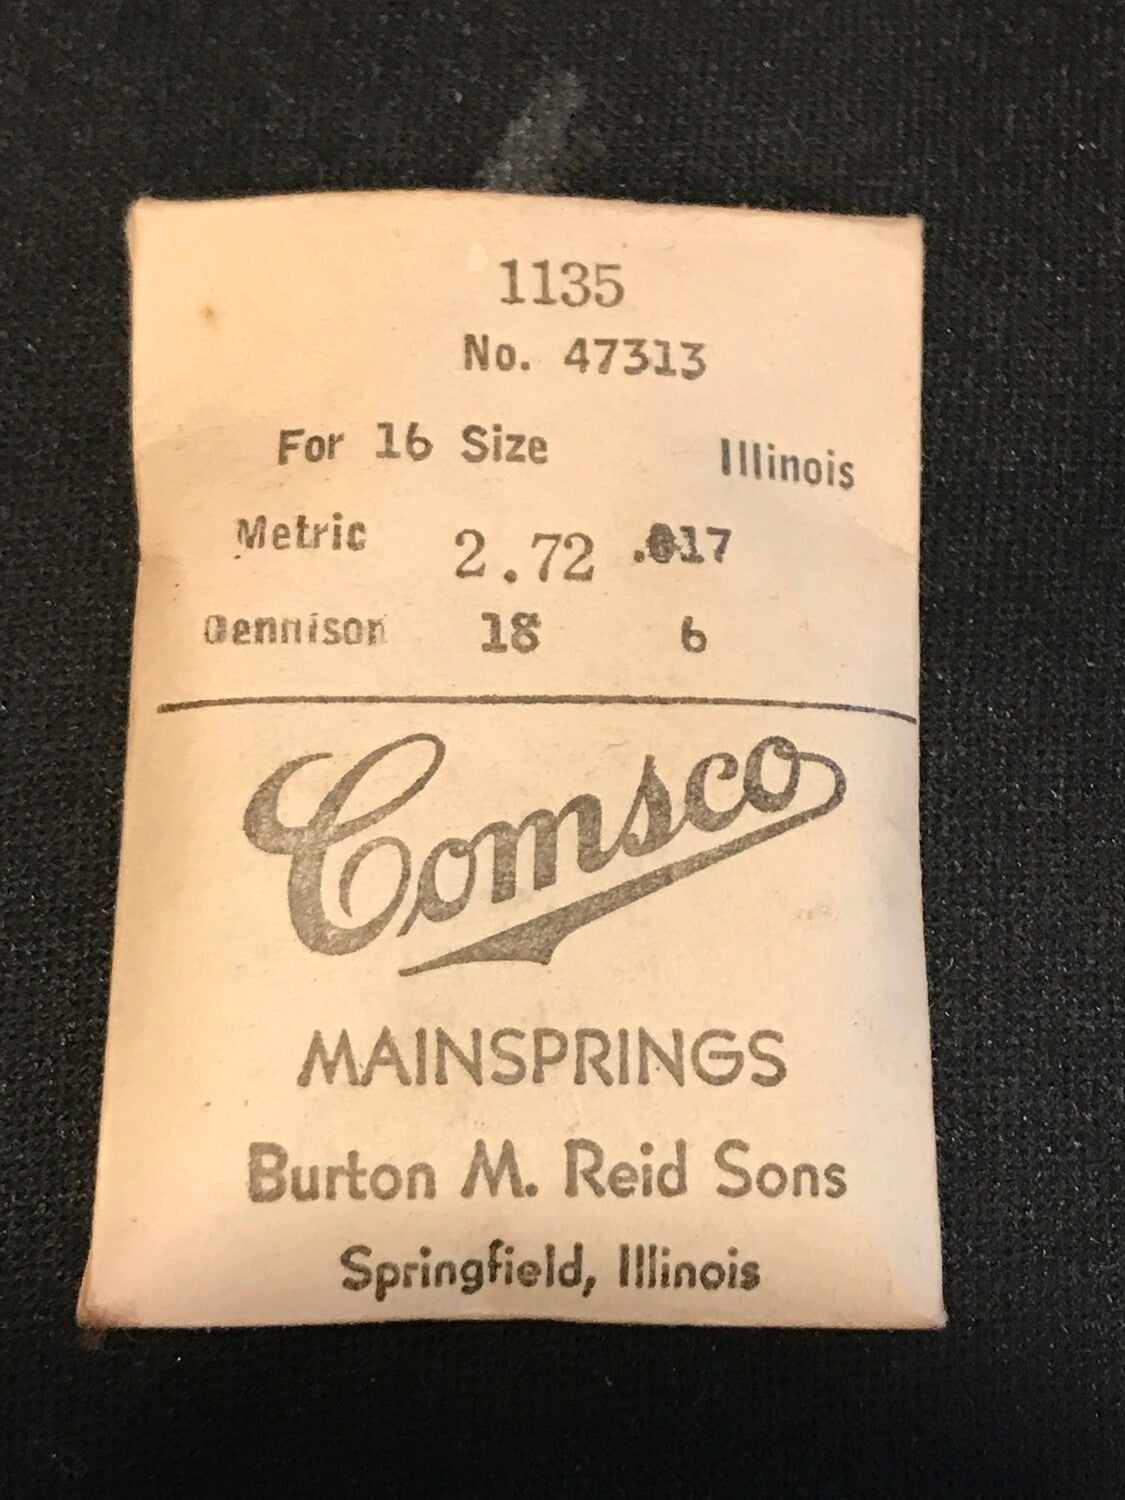 Comsco Mainspring #1135 for Illinois 16s Factory No. 47313 - Steel